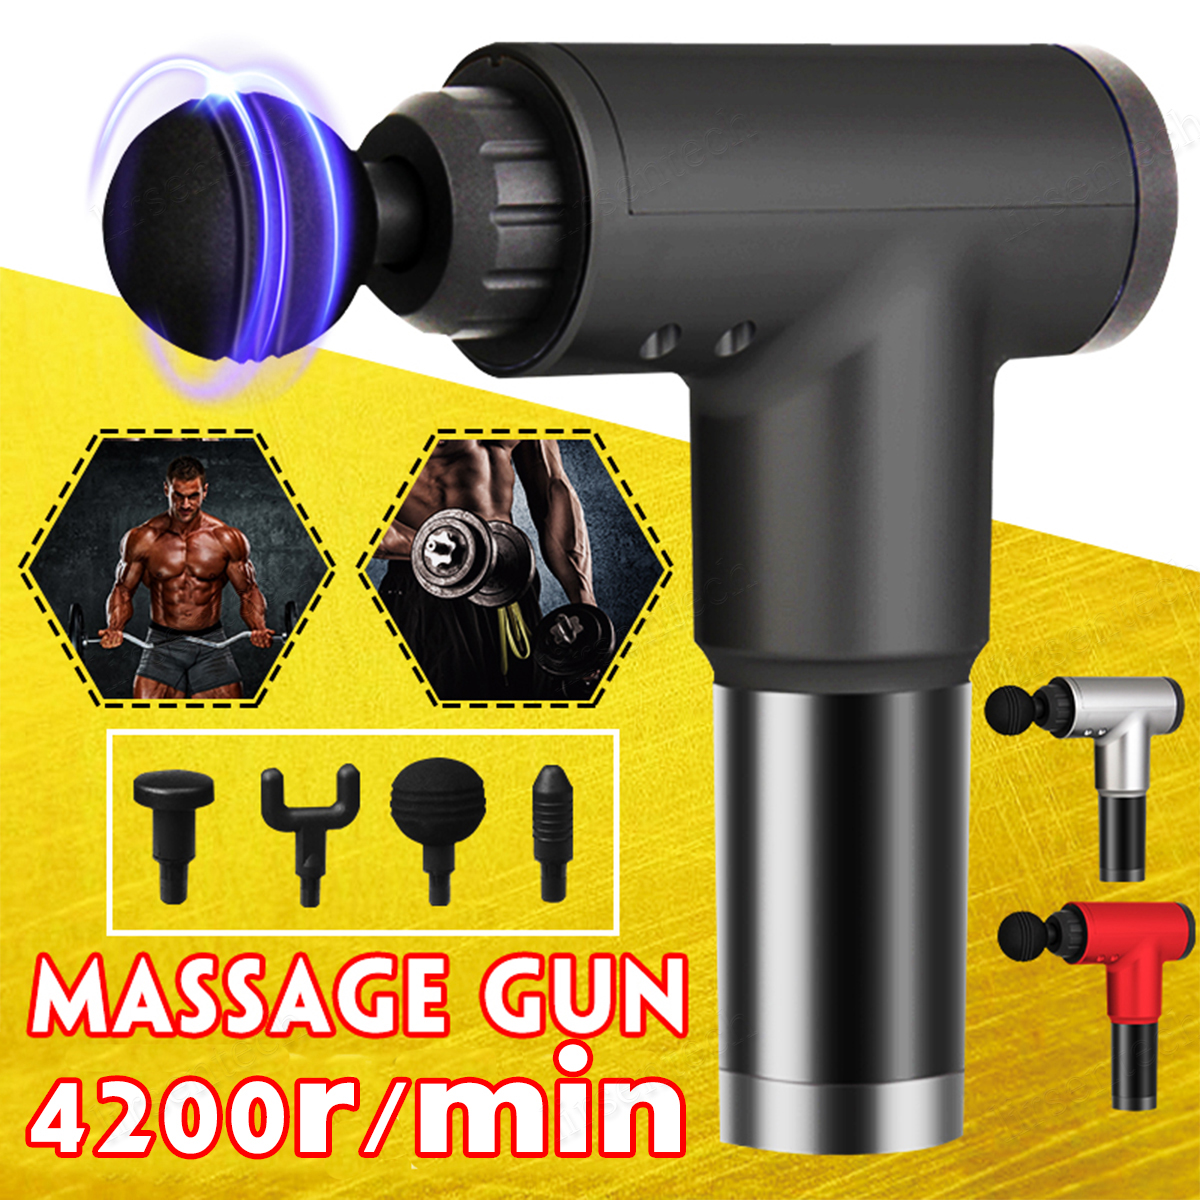 

4200r/min Mini Body Muscle Therapy Sport Massage Guns Electric Booster Vibration Percussion Massager Home Deep Tissue Pain Relief